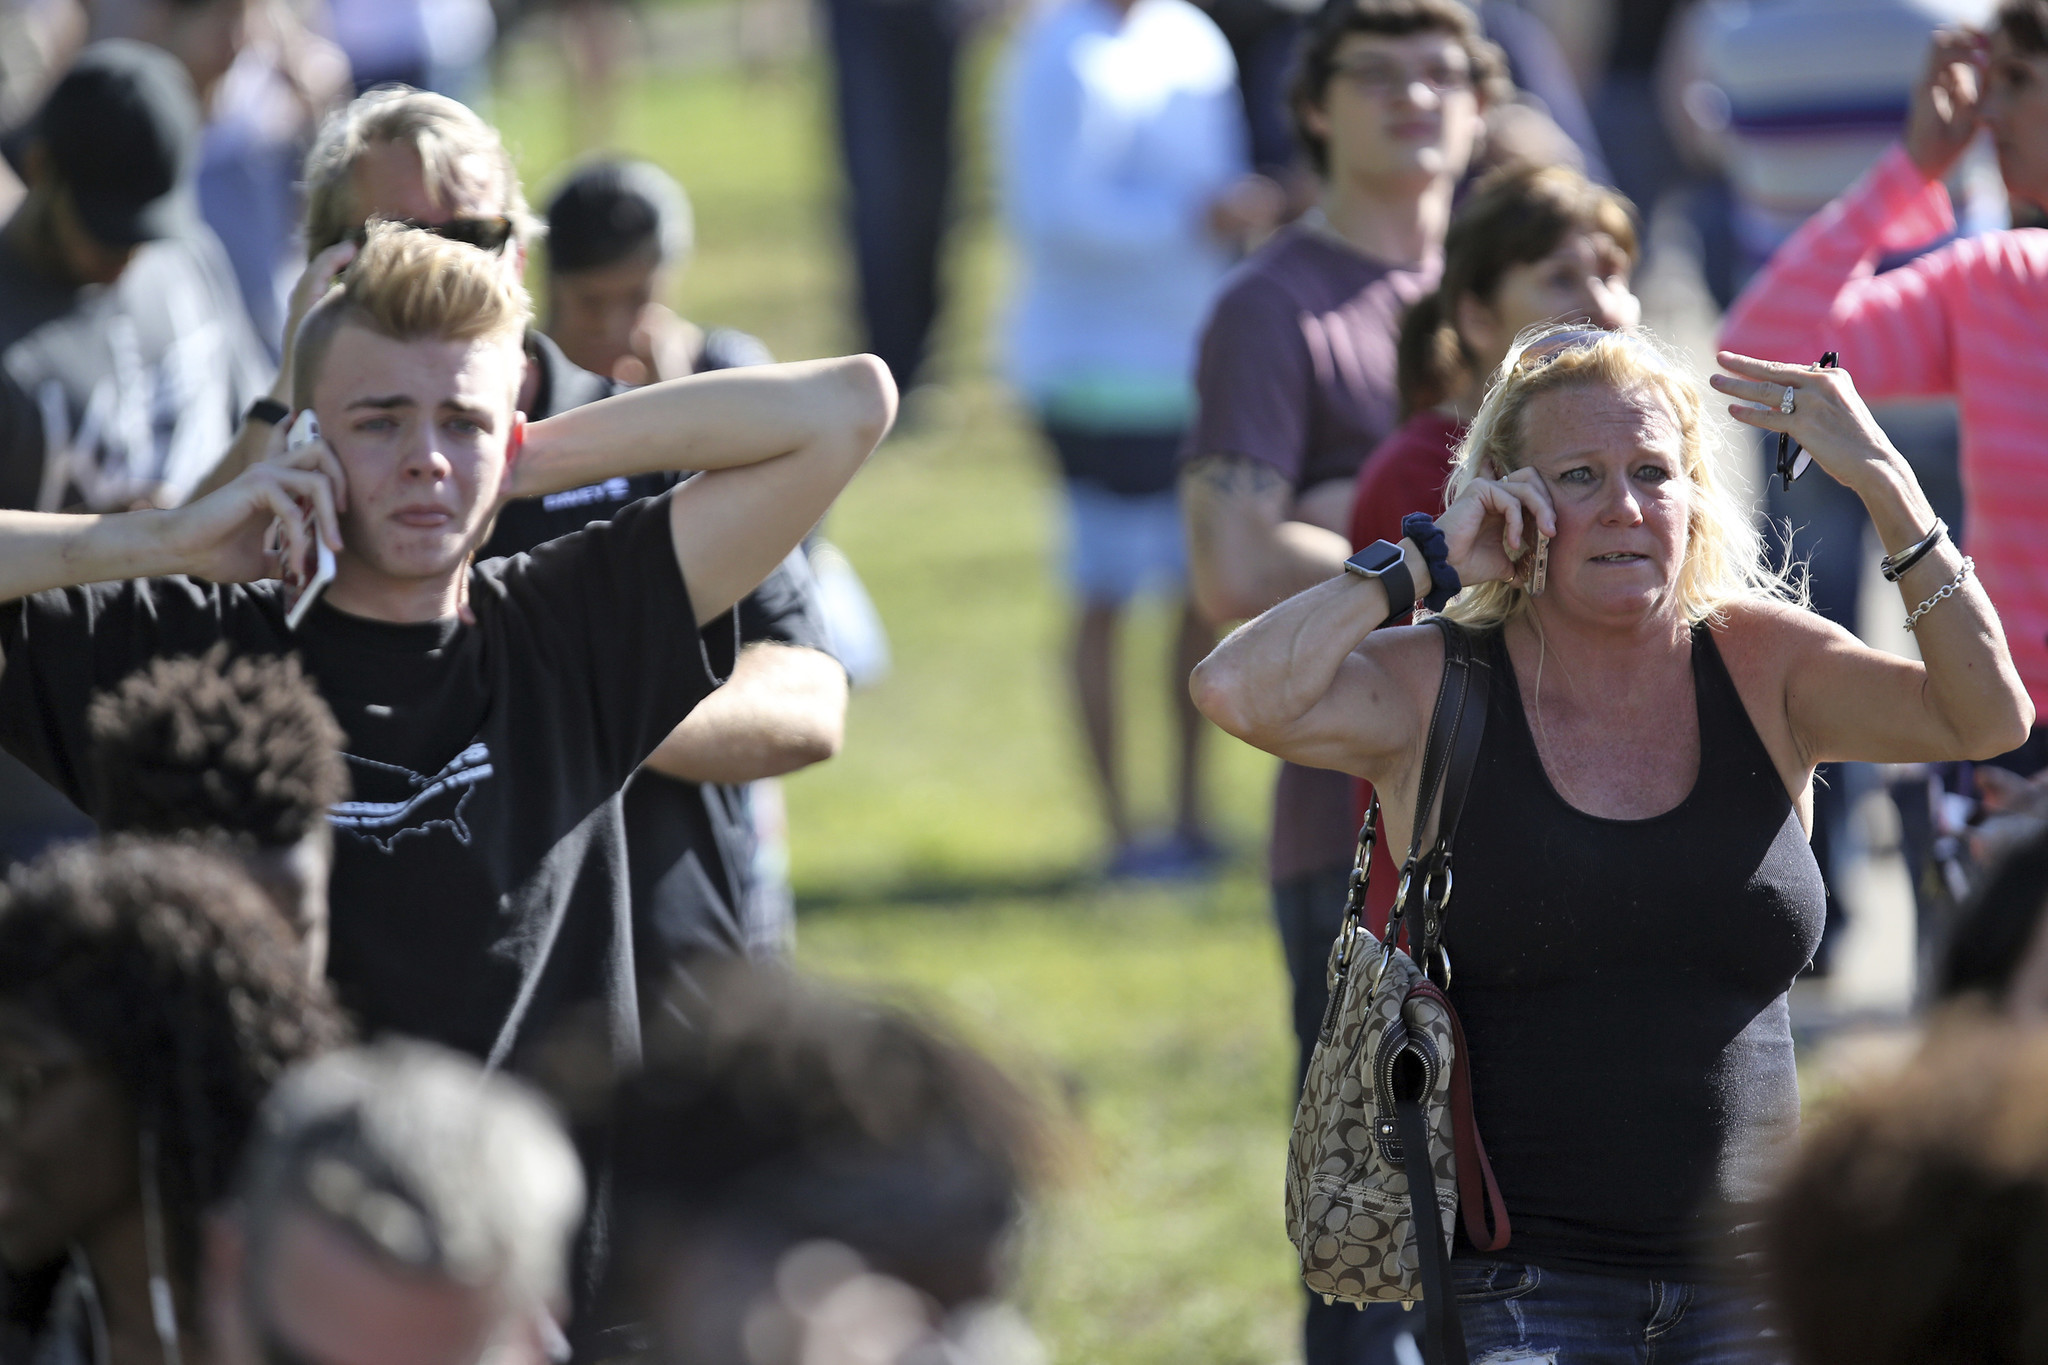 School Shootings Are Becoming More Common